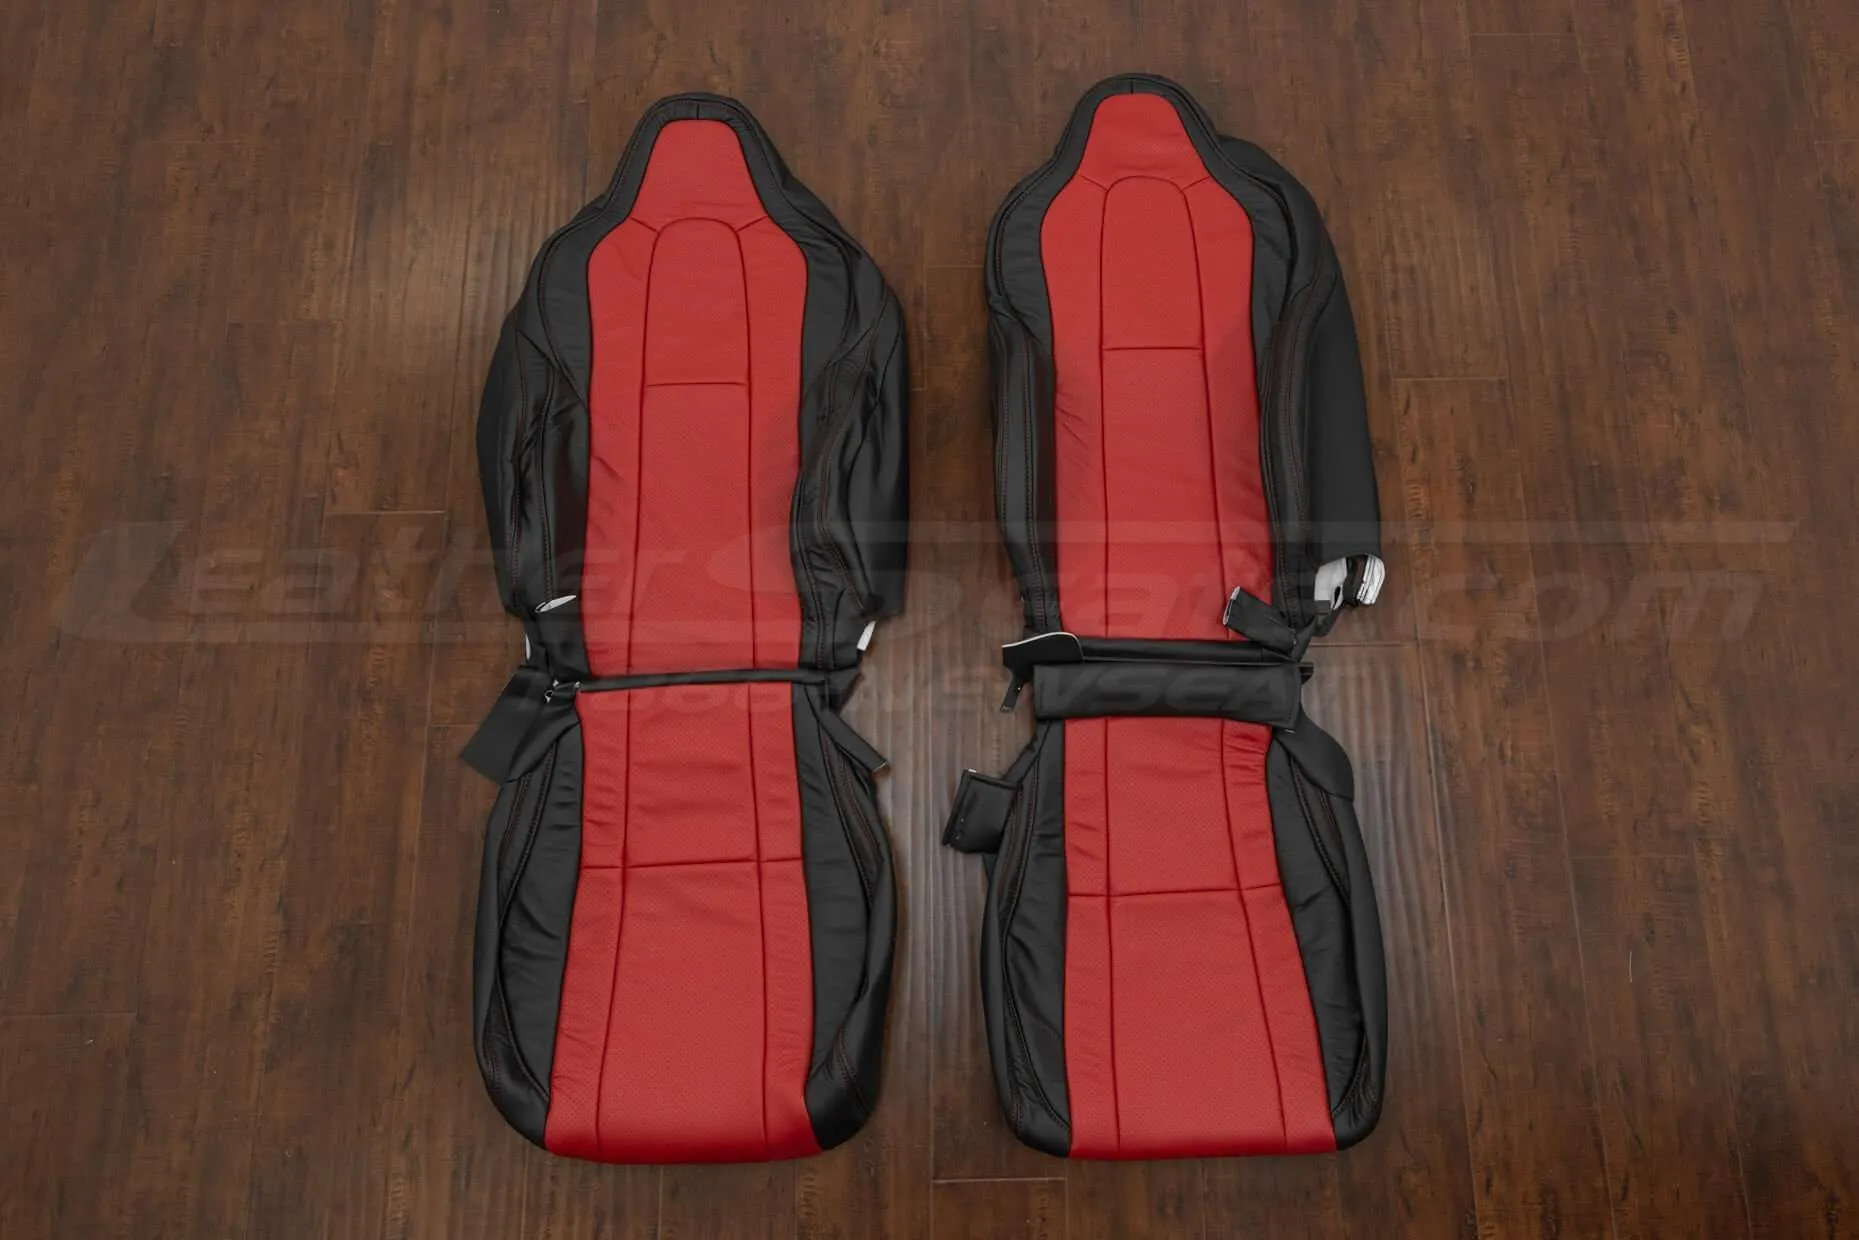 2023 Honda Civic Si Leather Seat Kit - Ecstasy Black/Ecstasy red - Front seat upholstery